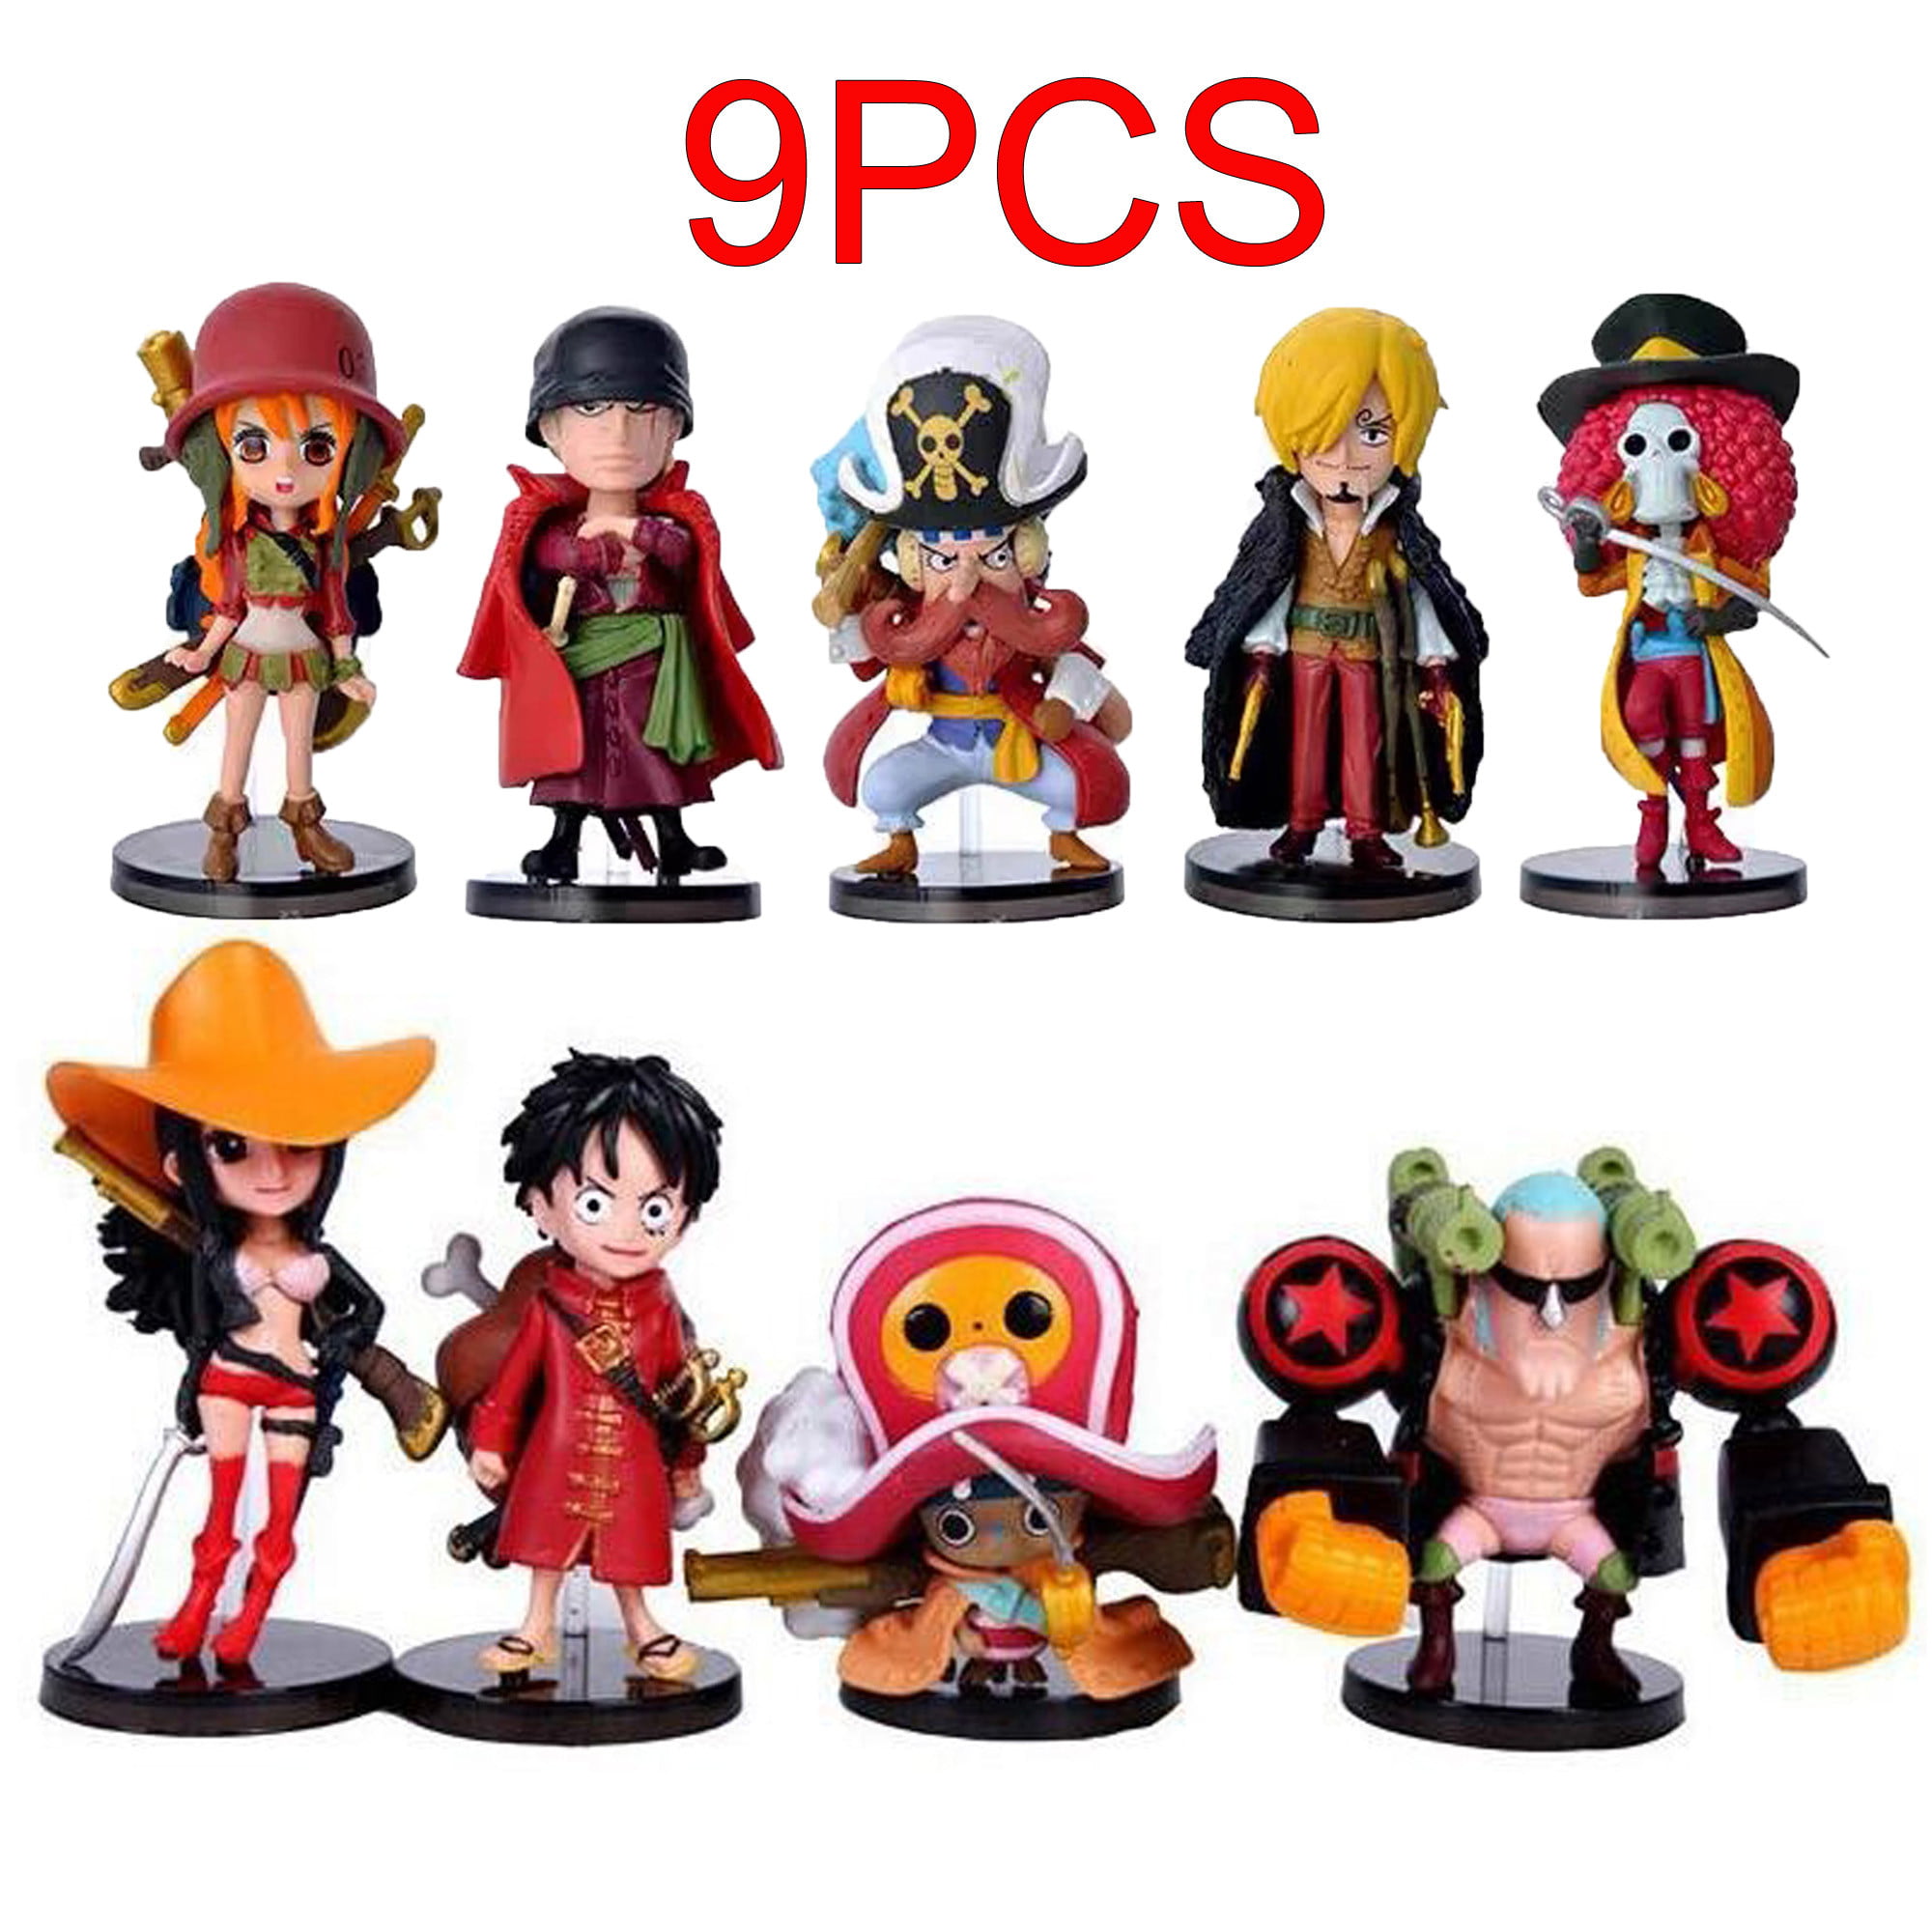 9pcs Full Set Anime One Piece Mini Action Figures Toys Cute Collection of Dolls 